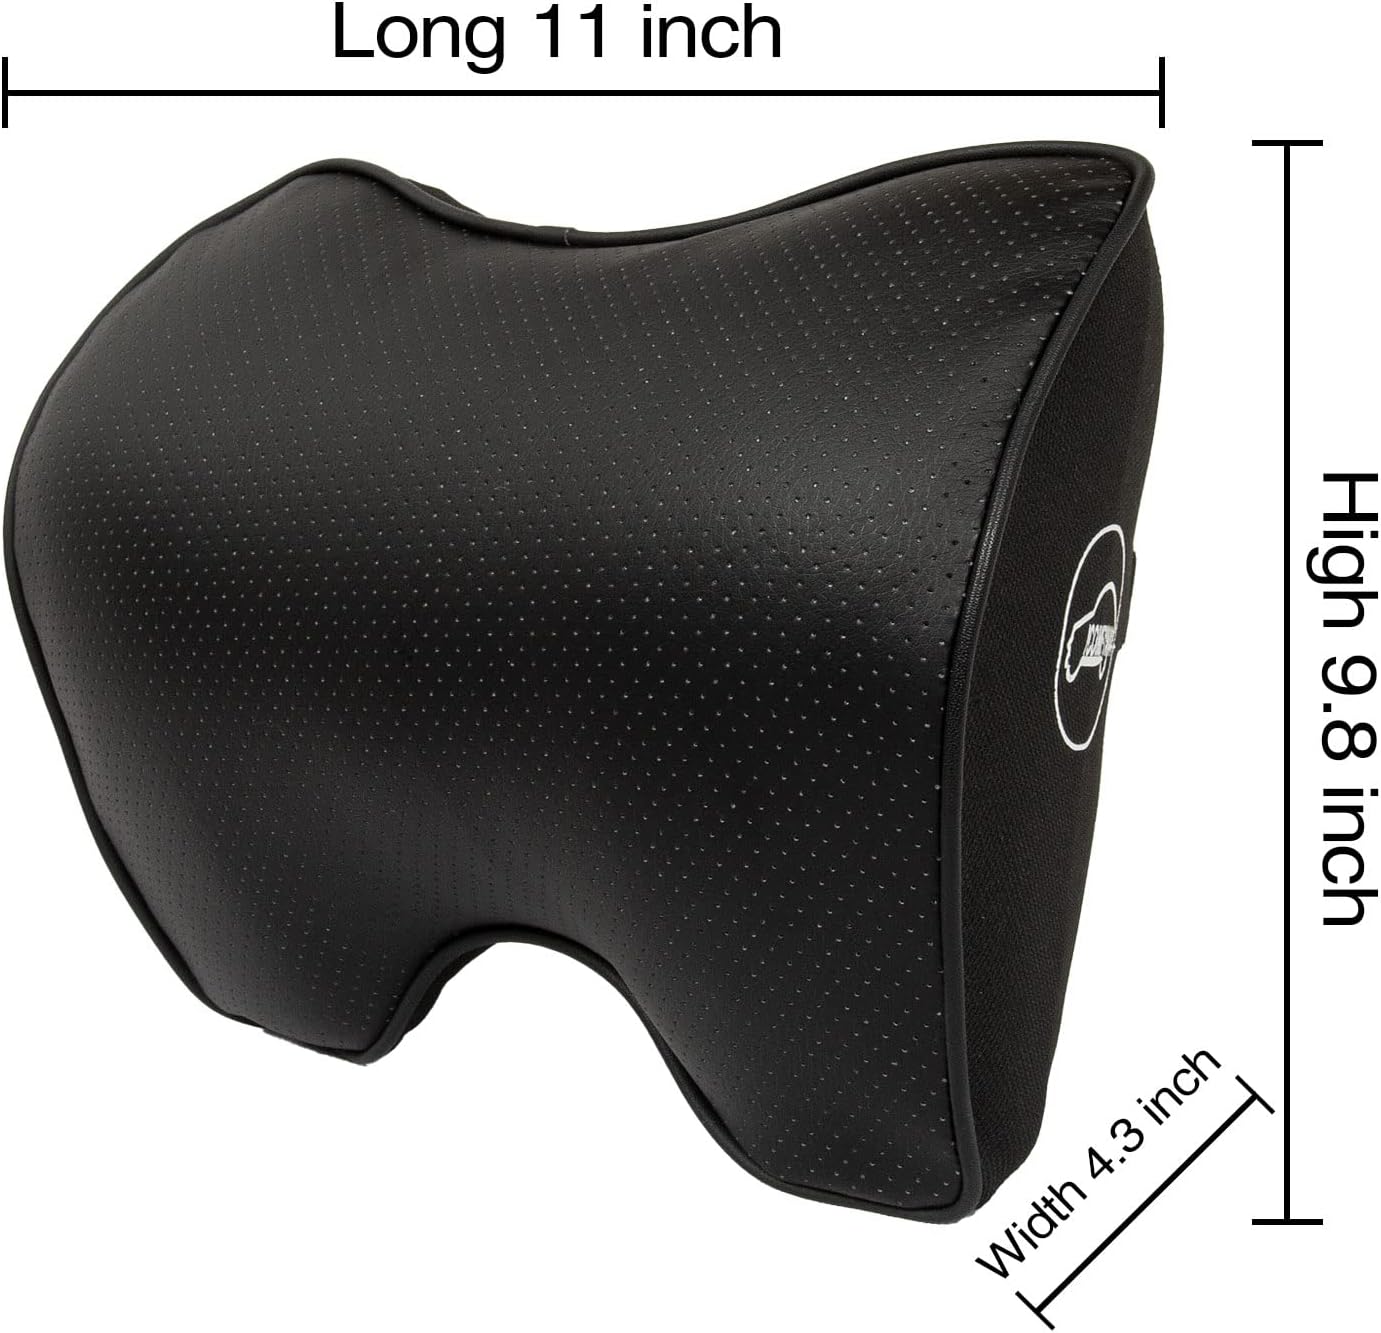 Car Neck Support Pillow for Neck Pain Relief When Driving,Headrest Pillow for Car Seat with Soft Memory Foam – Black